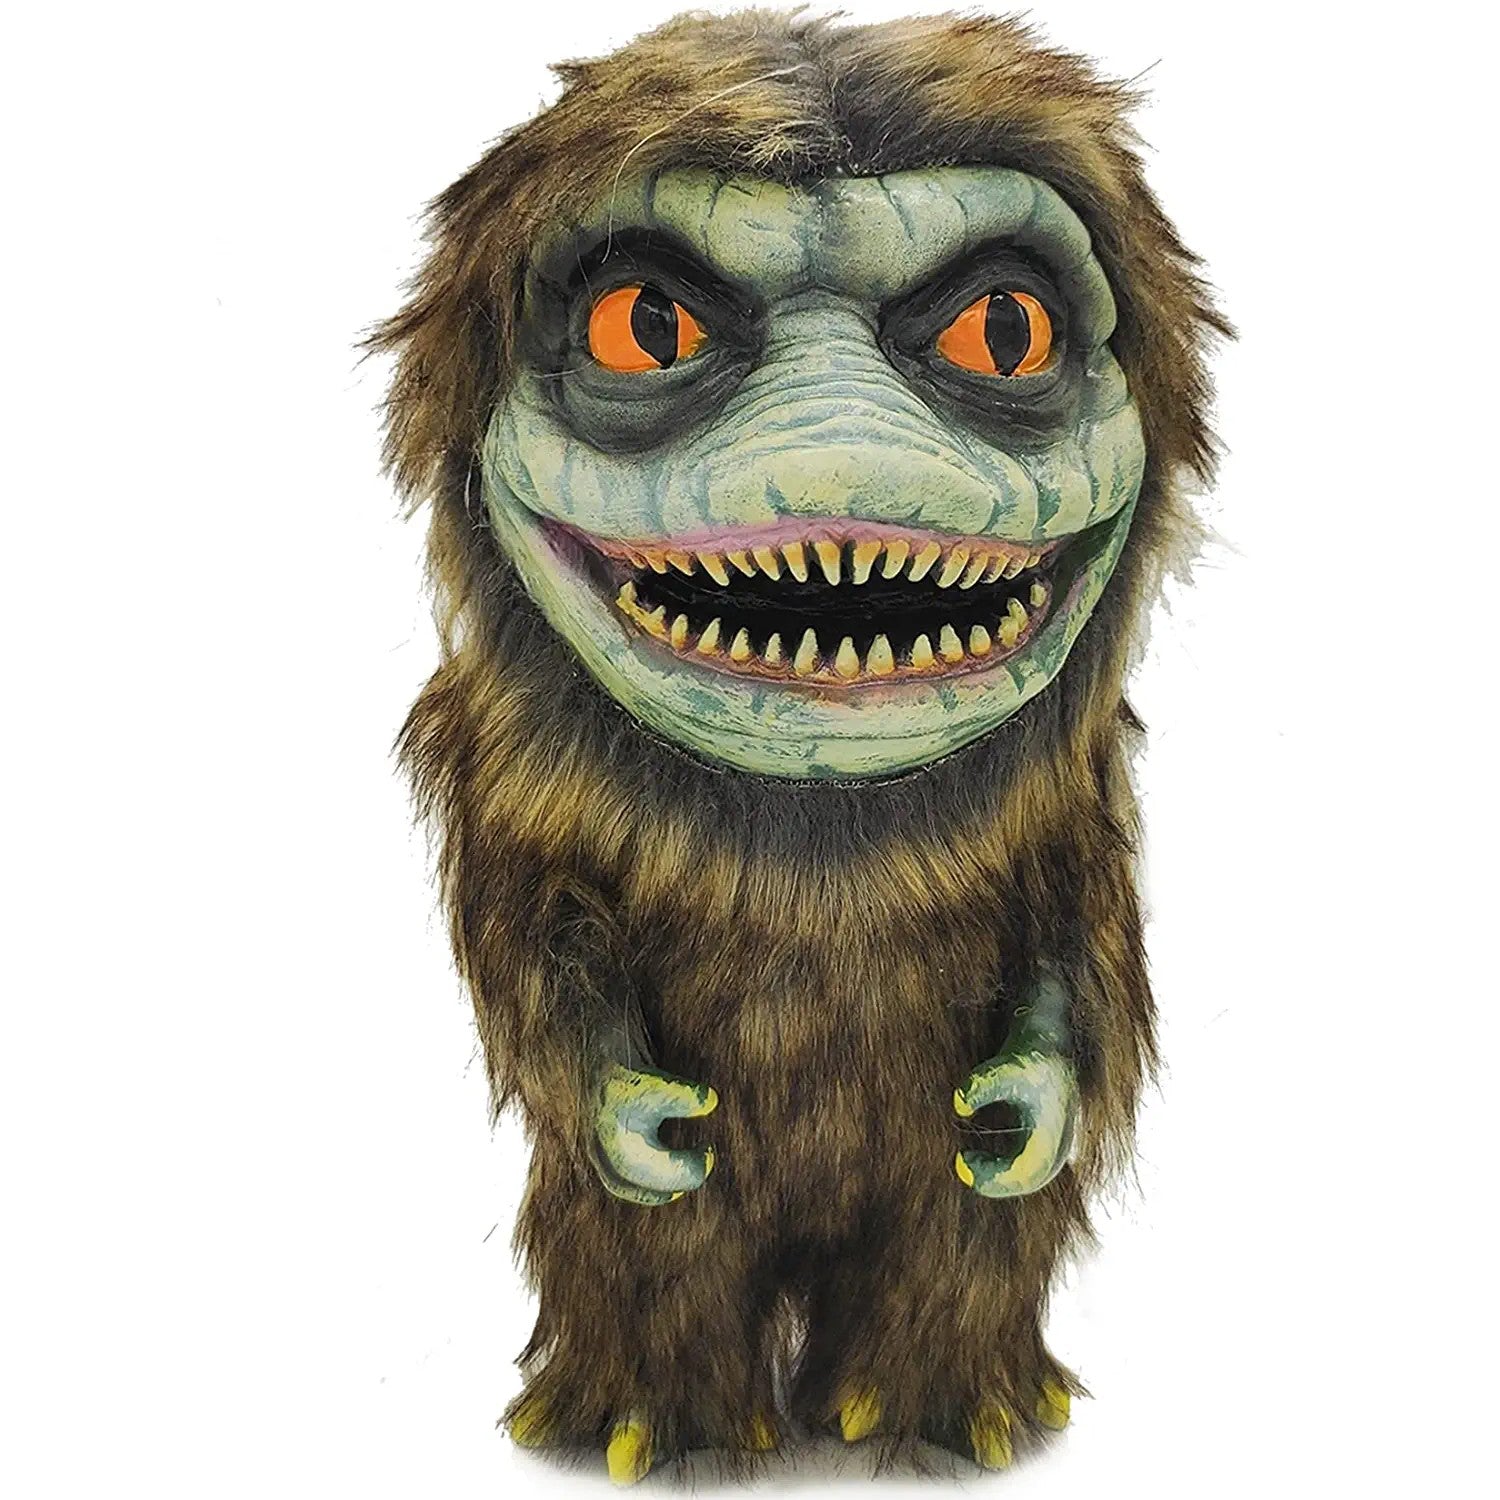 A grinning Critters doll covered in fur from the Critters movies.